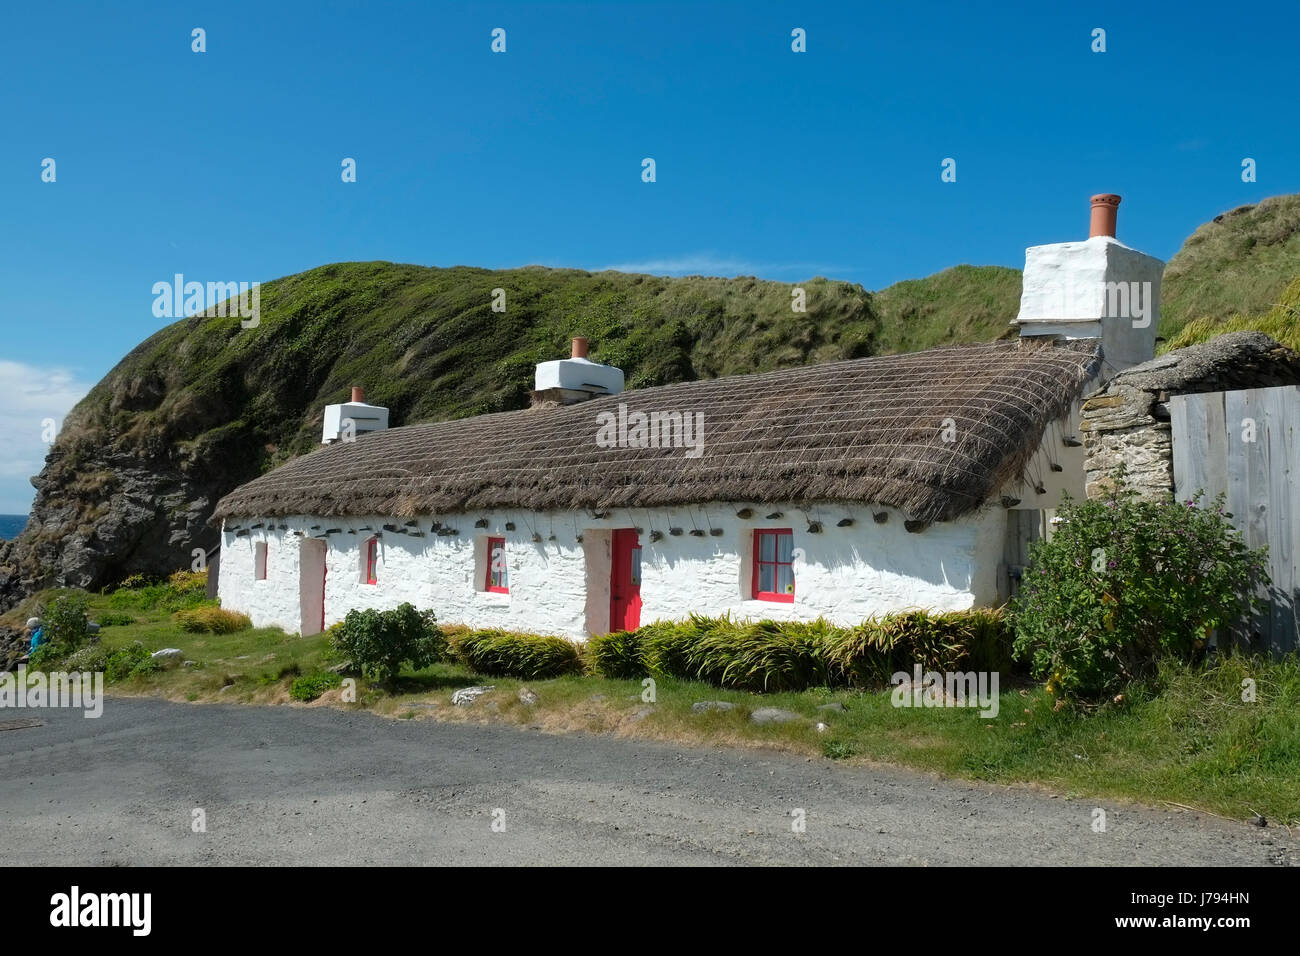 Niarbyl, Isle of Man, showing the beach, bay, row of cottages and a fisherman's hut, used for the filming of 'Waking Ned Devine'. Stock Photo